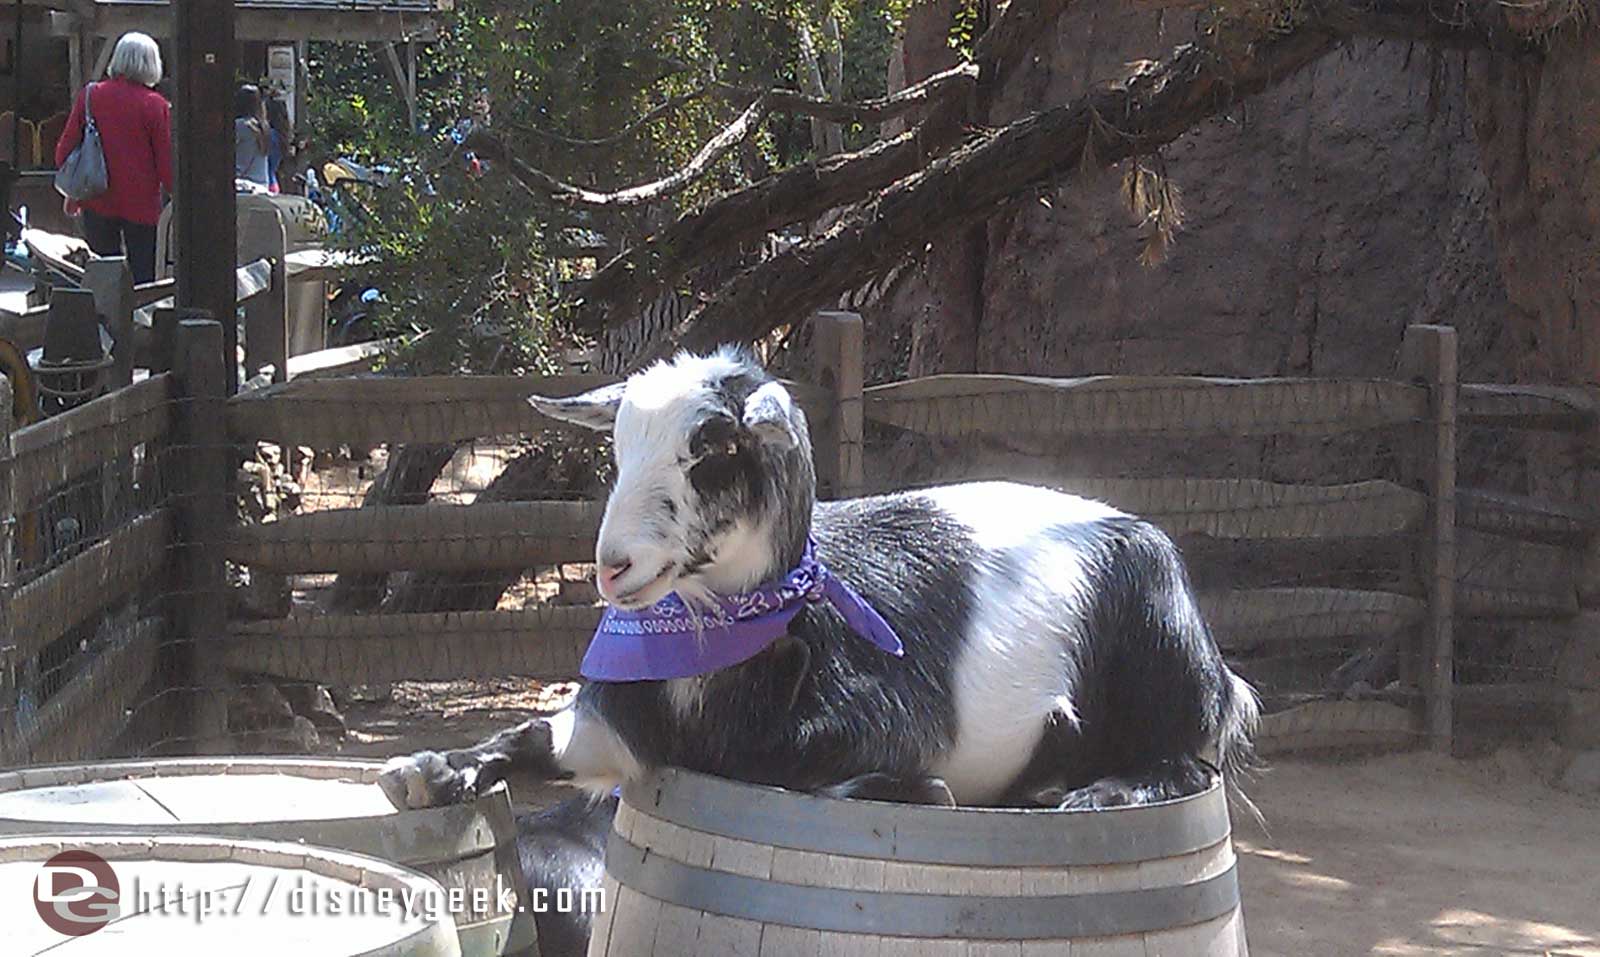 Big Thunder Ranch looks like this goat is endorsing the spring break mood